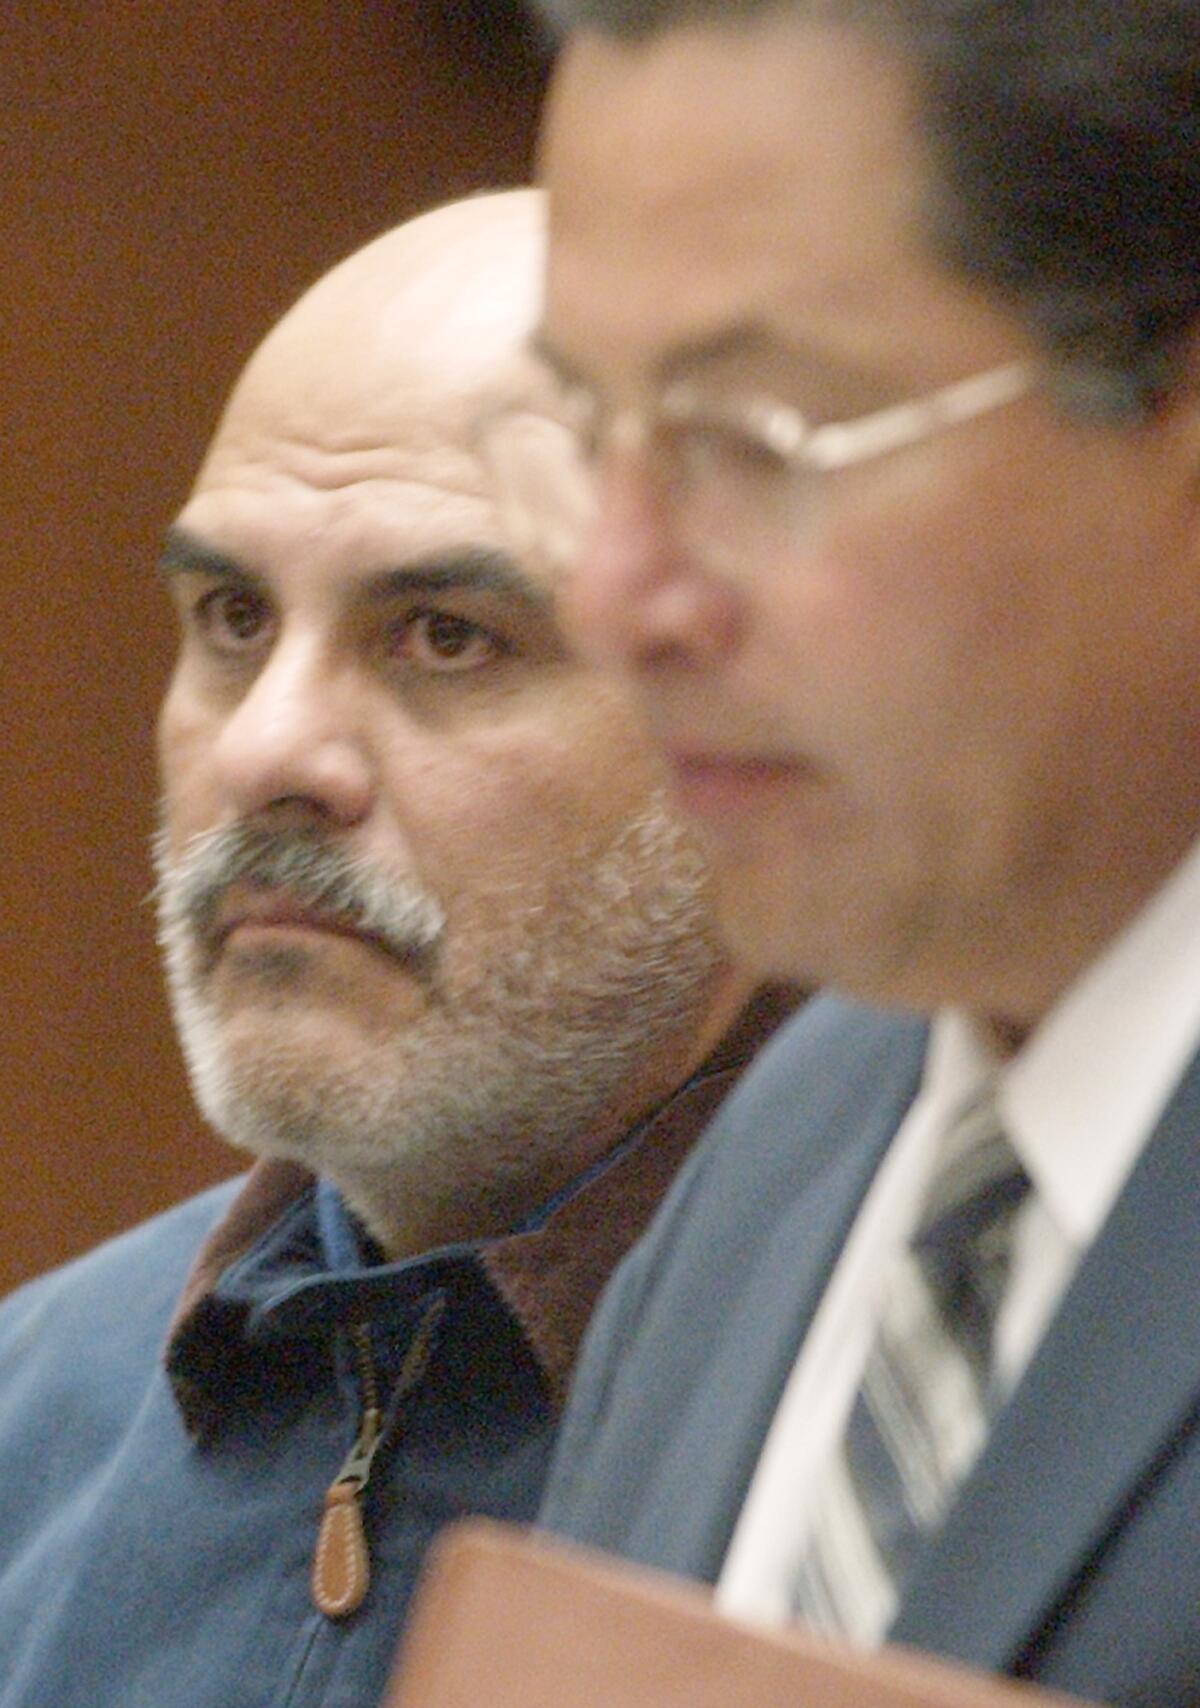 In this file photo, John Anthony Salazar, a former priest accused of sexually assaulting two boys in Los Angeles in the 1980s, appears with his attorney, Daniel Guerrero, right, in Superior Court in Los Angeles for his arraignment in 2003.